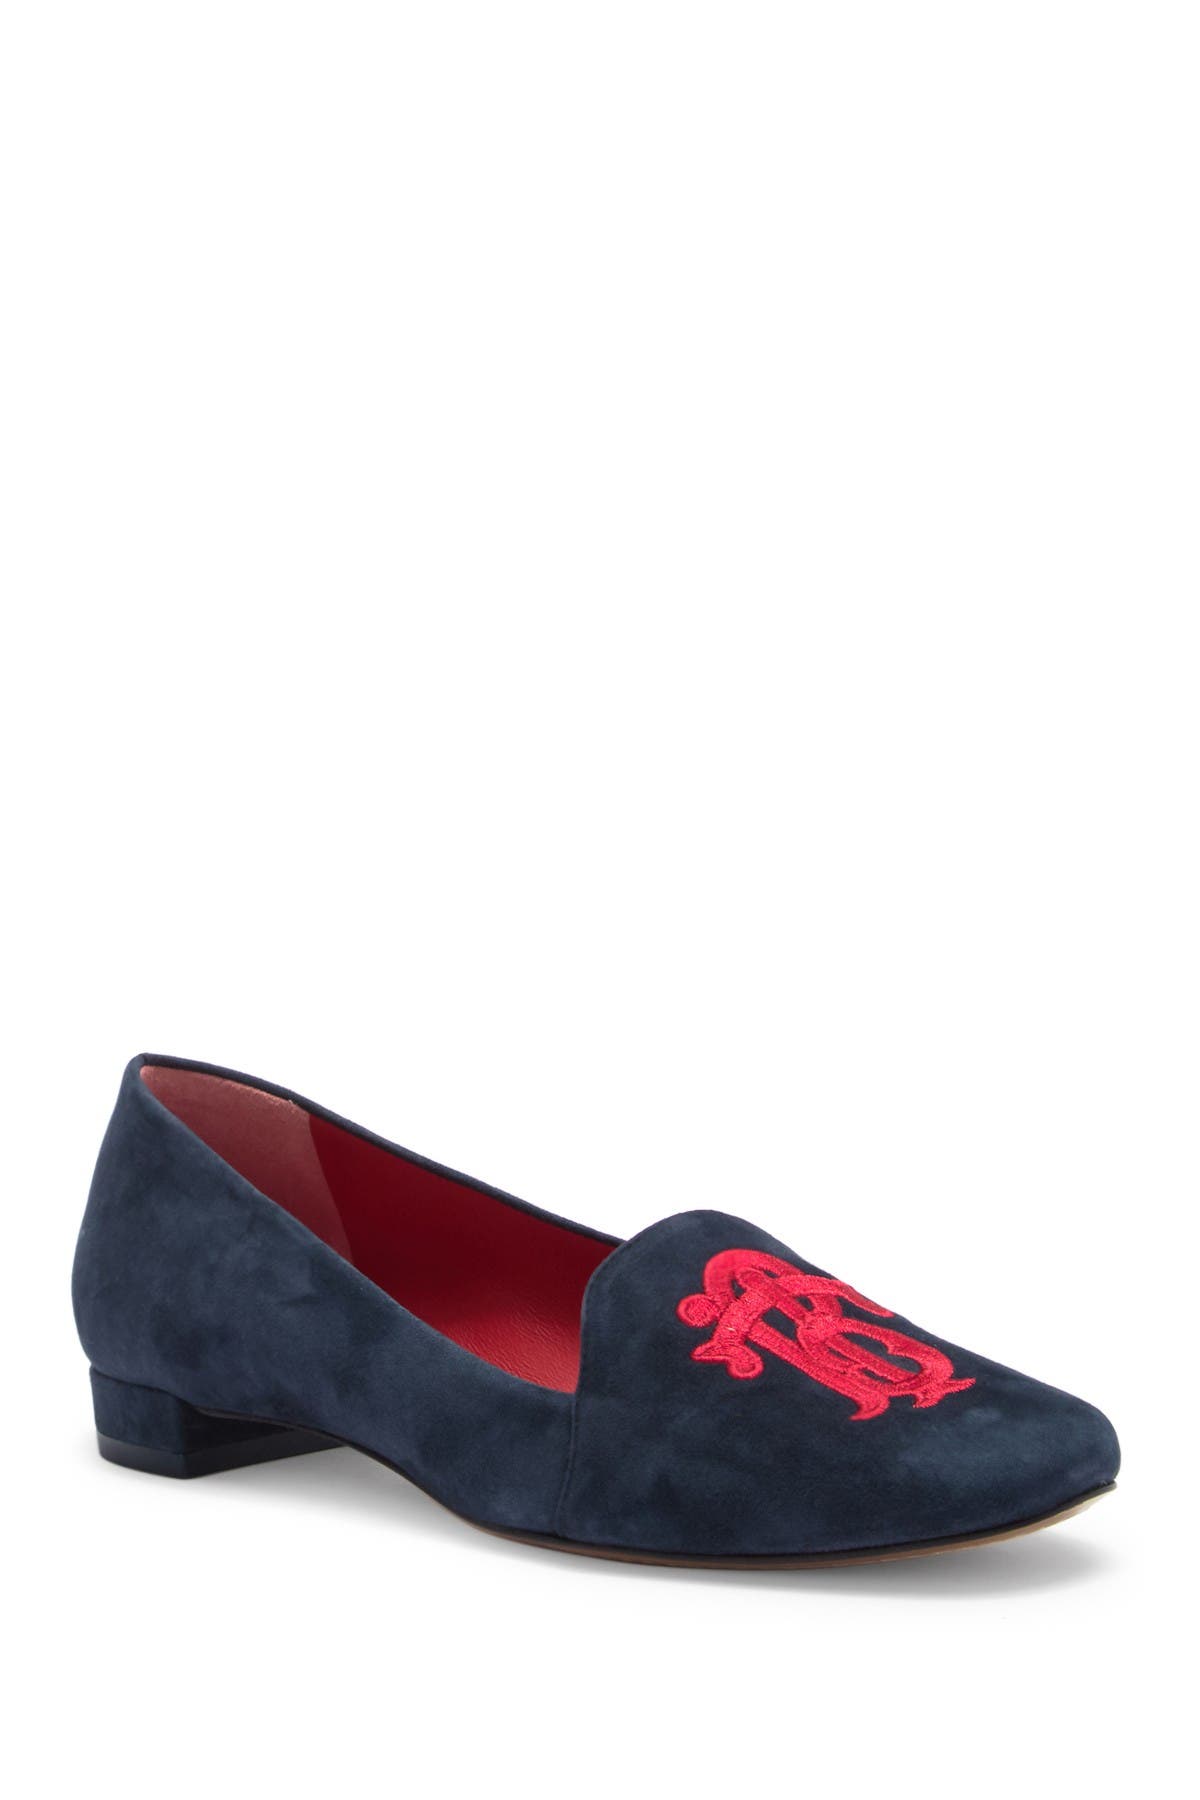 Tory Burch | Antonia Loafer | Nordstrom 